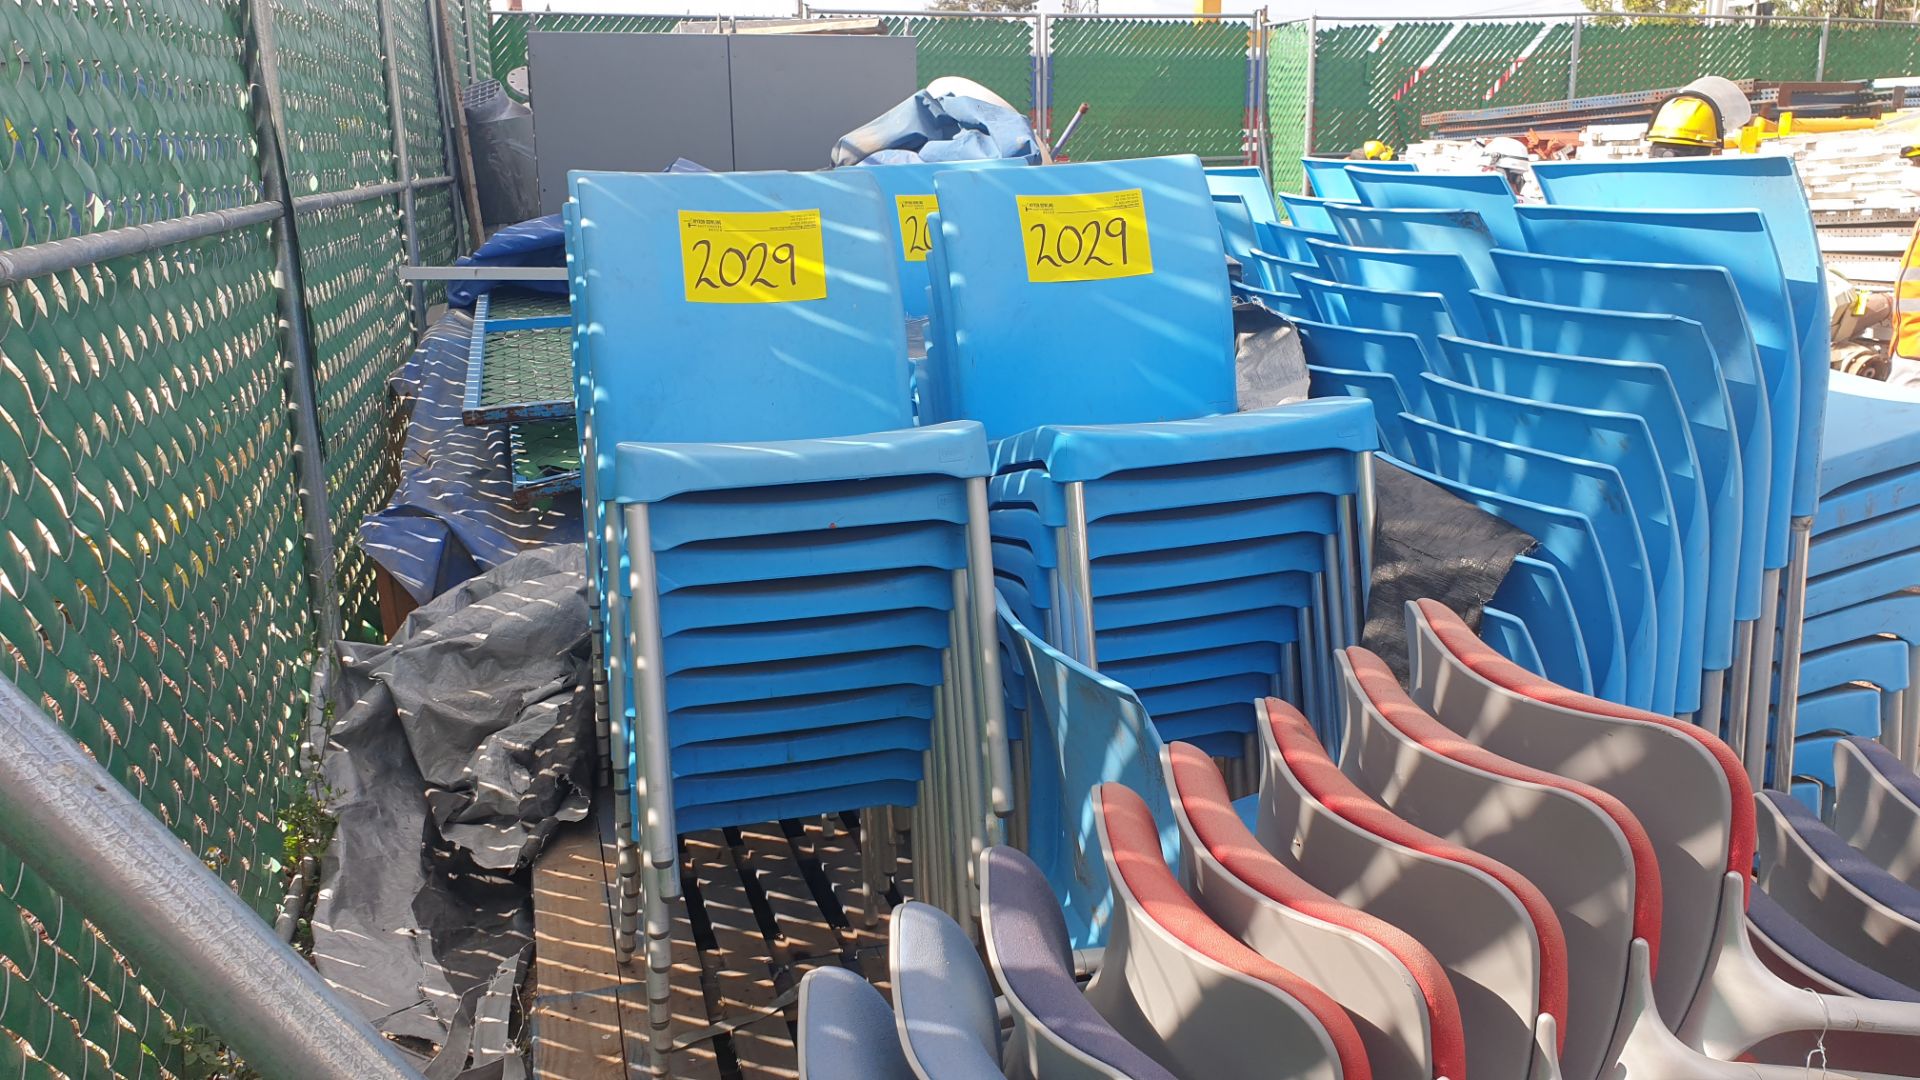 1 Lote of 40 blue plastic chairs, 7 metal chairs for office with backrest and upholstered seat - Bild 7 aus 22